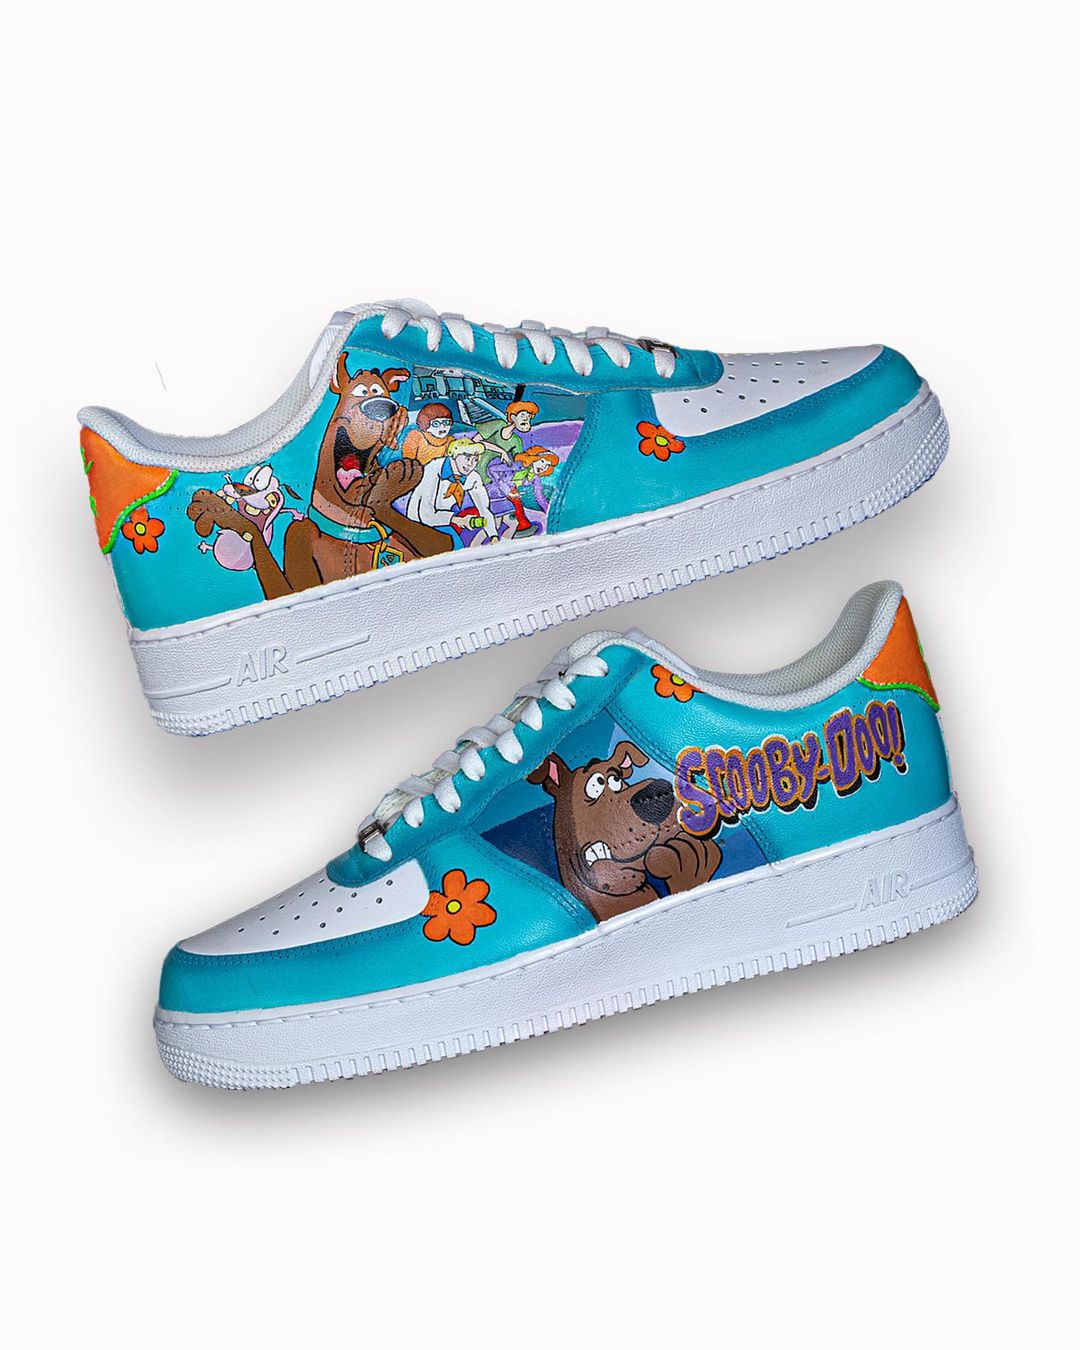 scooby doo air force 1s